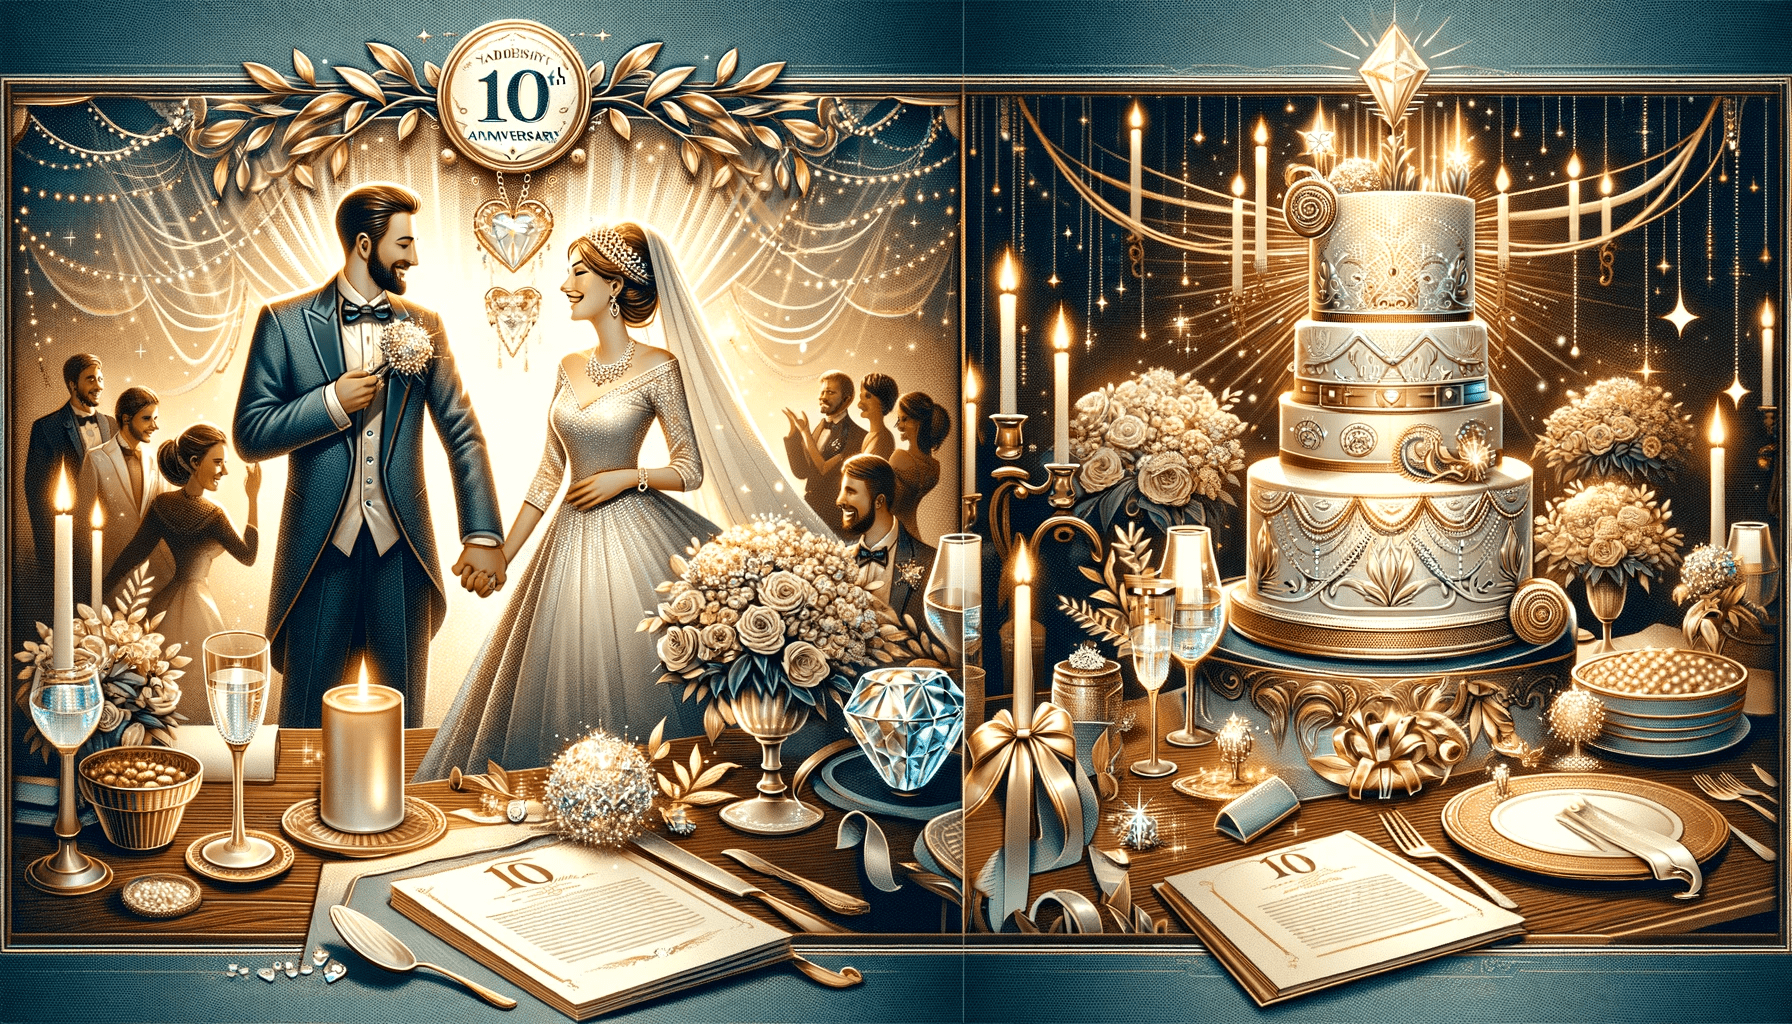 A beautiful featured image for an article on the 10th wedding anniversary, incorporating traditional and modern themes. The image depicts a celebration.